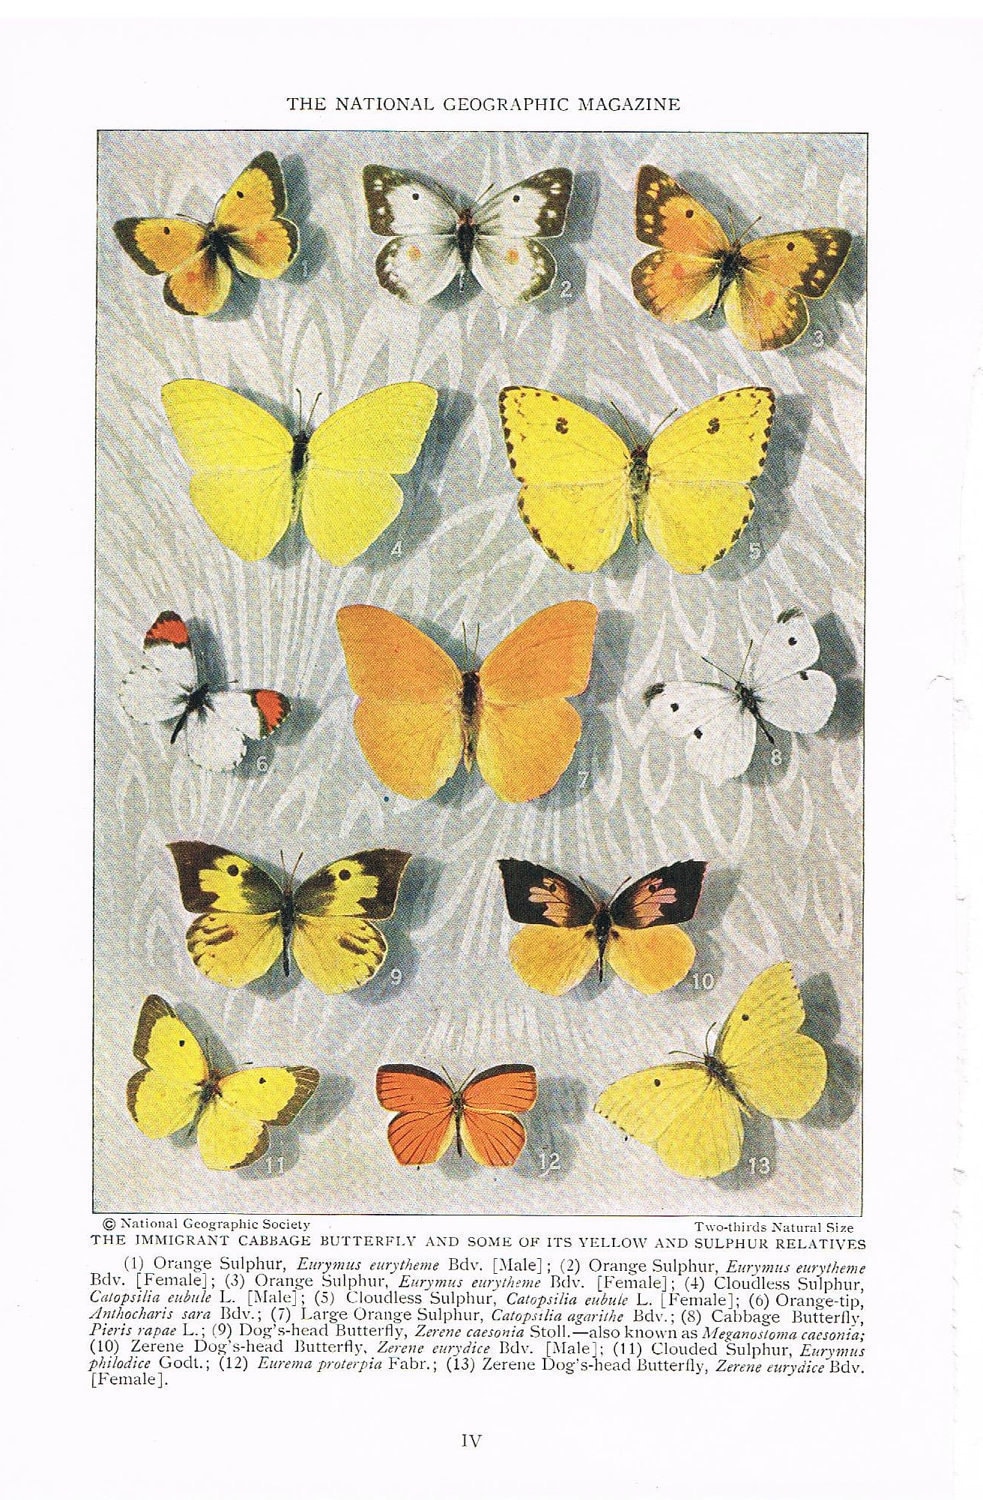 Antique 1927 Butterfly Print, Paper Ephemera, Species Identification Full Page Color Illustration, Home Decor, Art for Framing (IV) - YesterdaysSilhouette